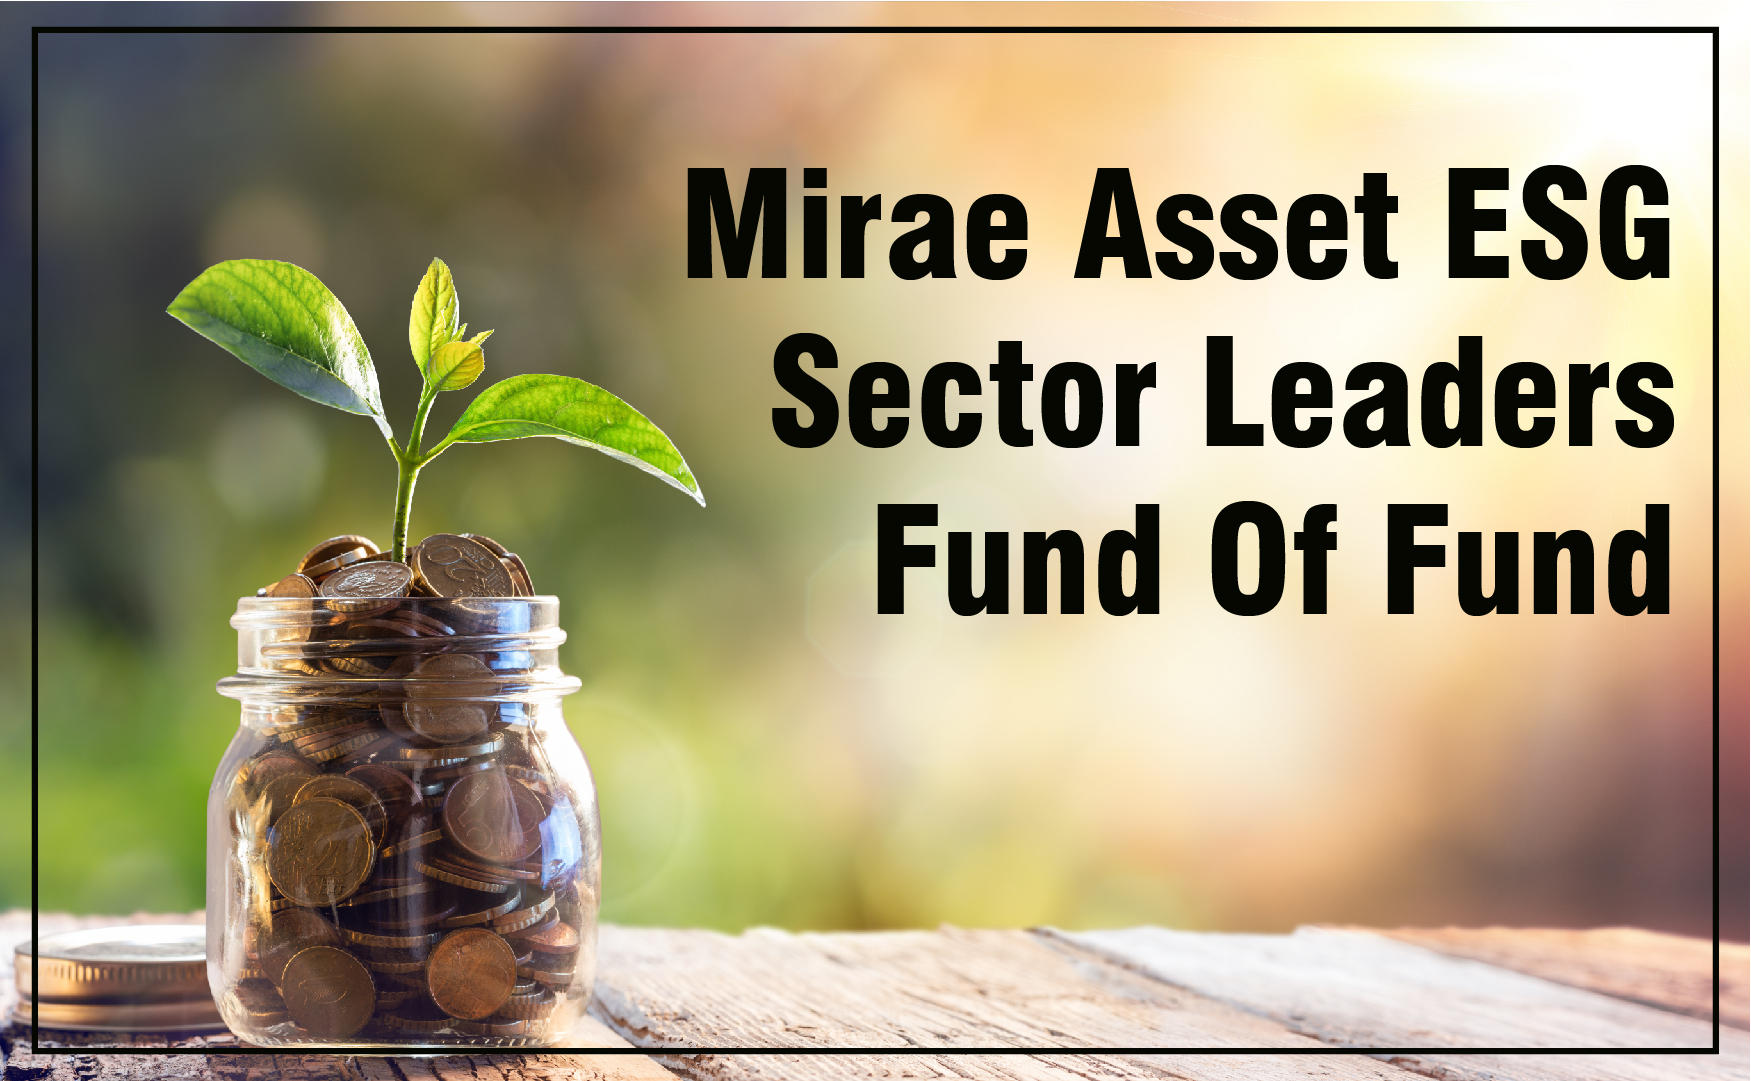 Mirae Asset ESG Sector Leaders Fund Of Fund Online Demat, Trading